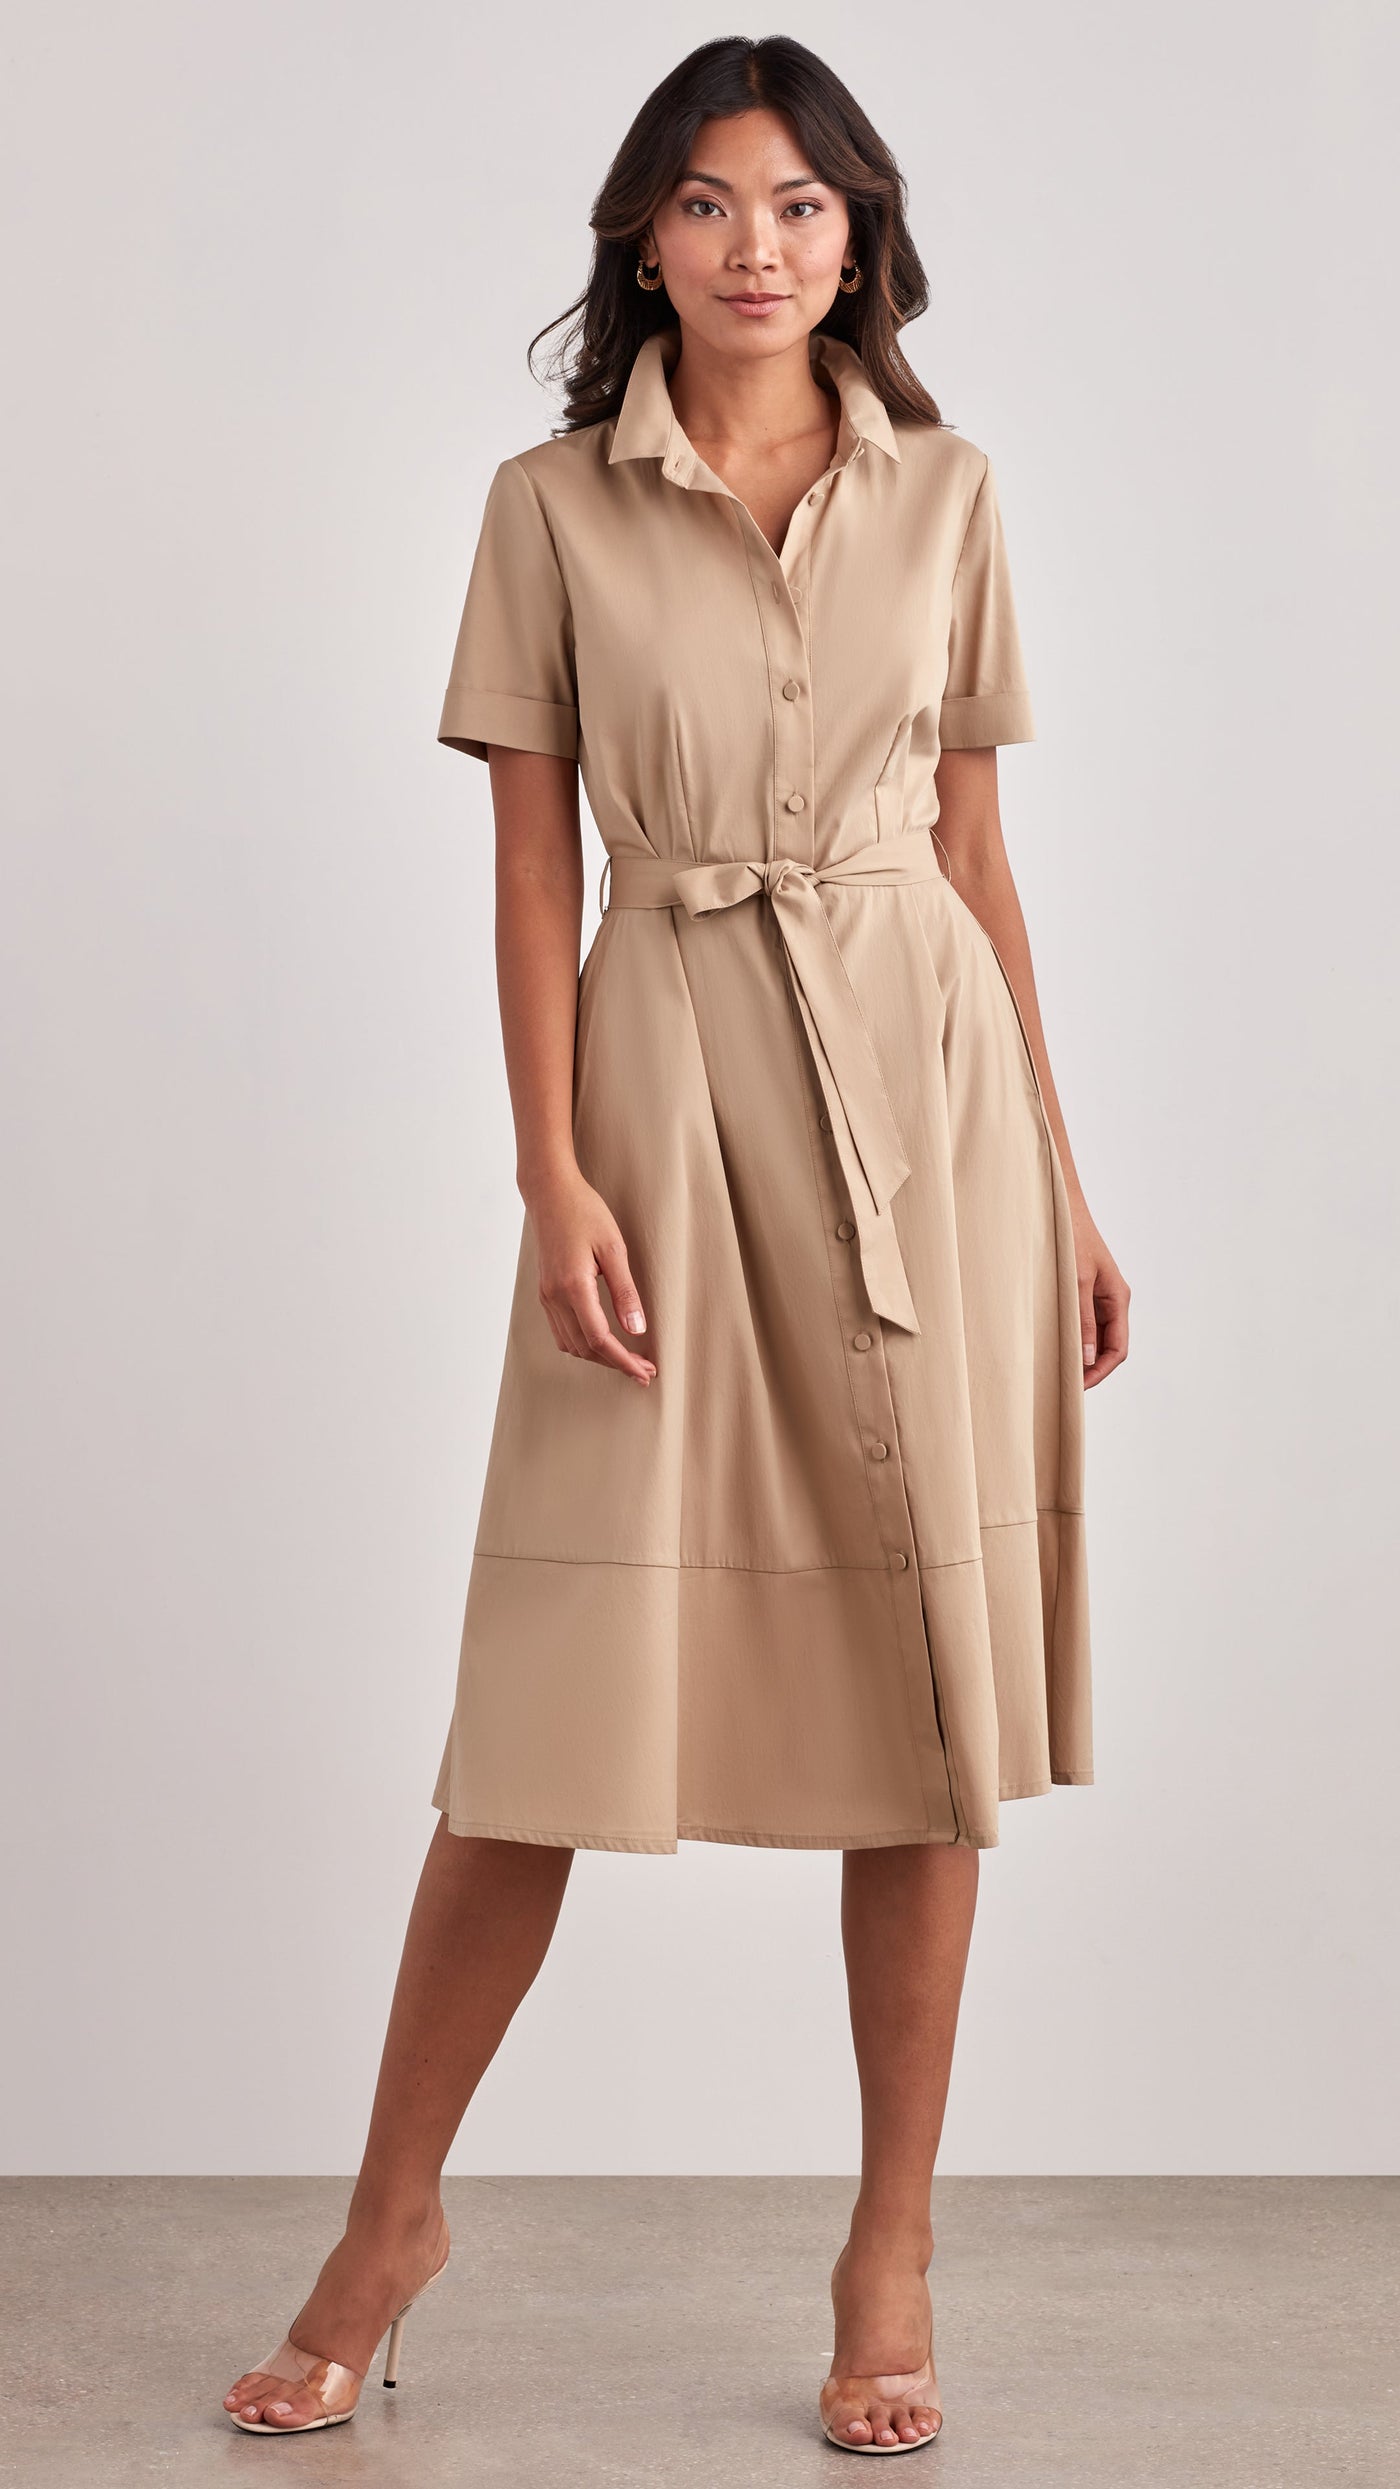 Herlipto Signs of Autumn Belted Dress - ロングワンピース